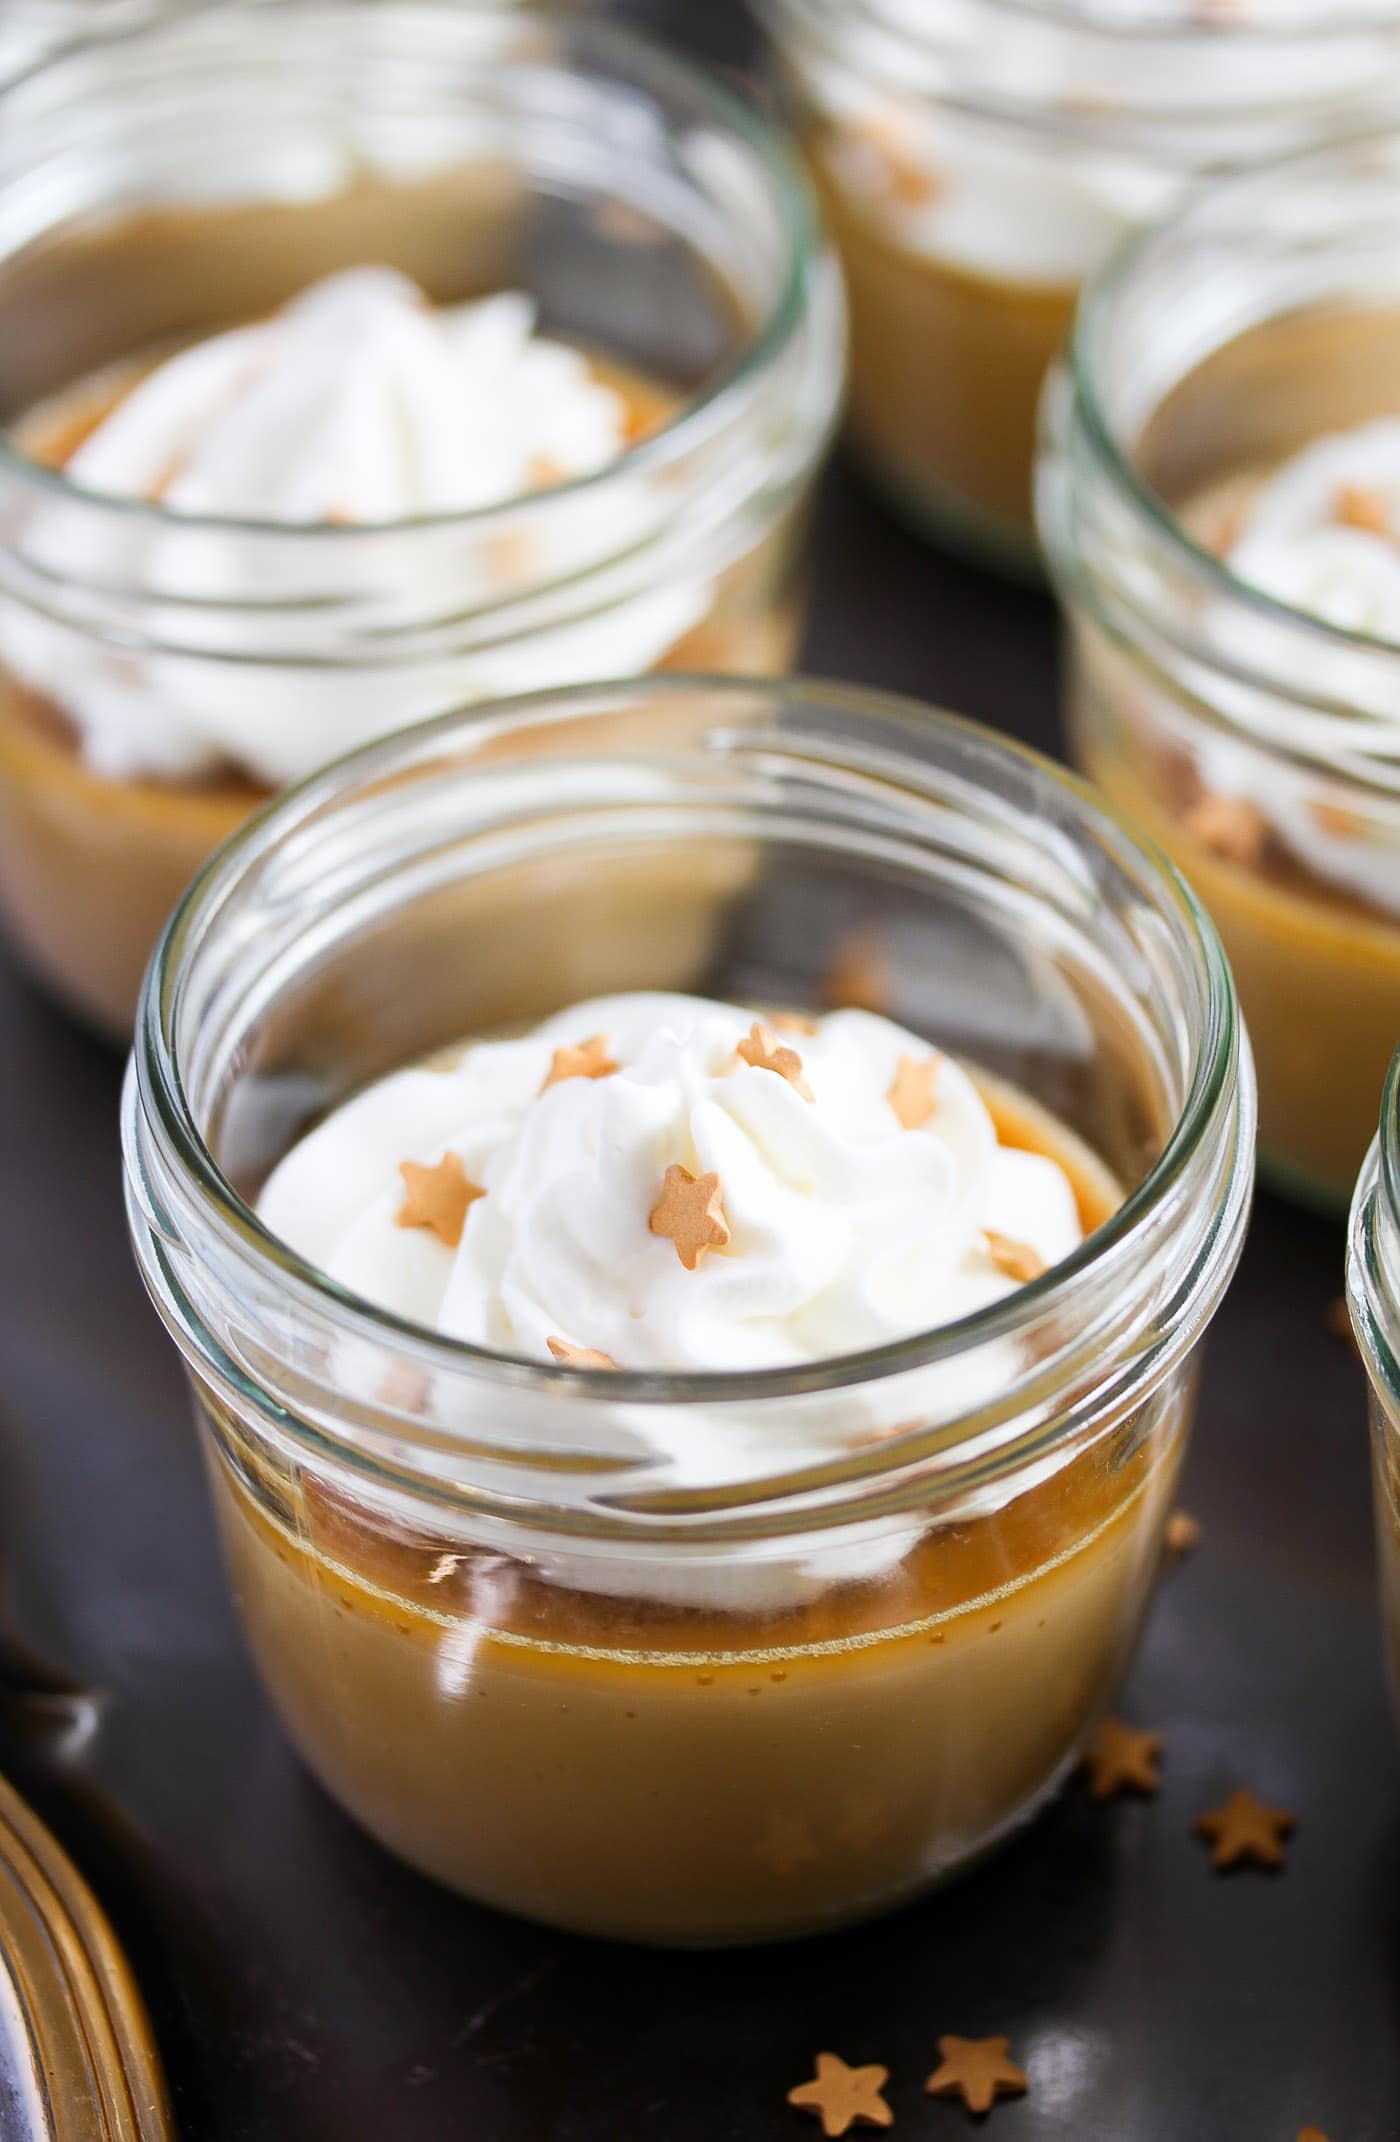 caramel custards in small jars sprinkled with little stars